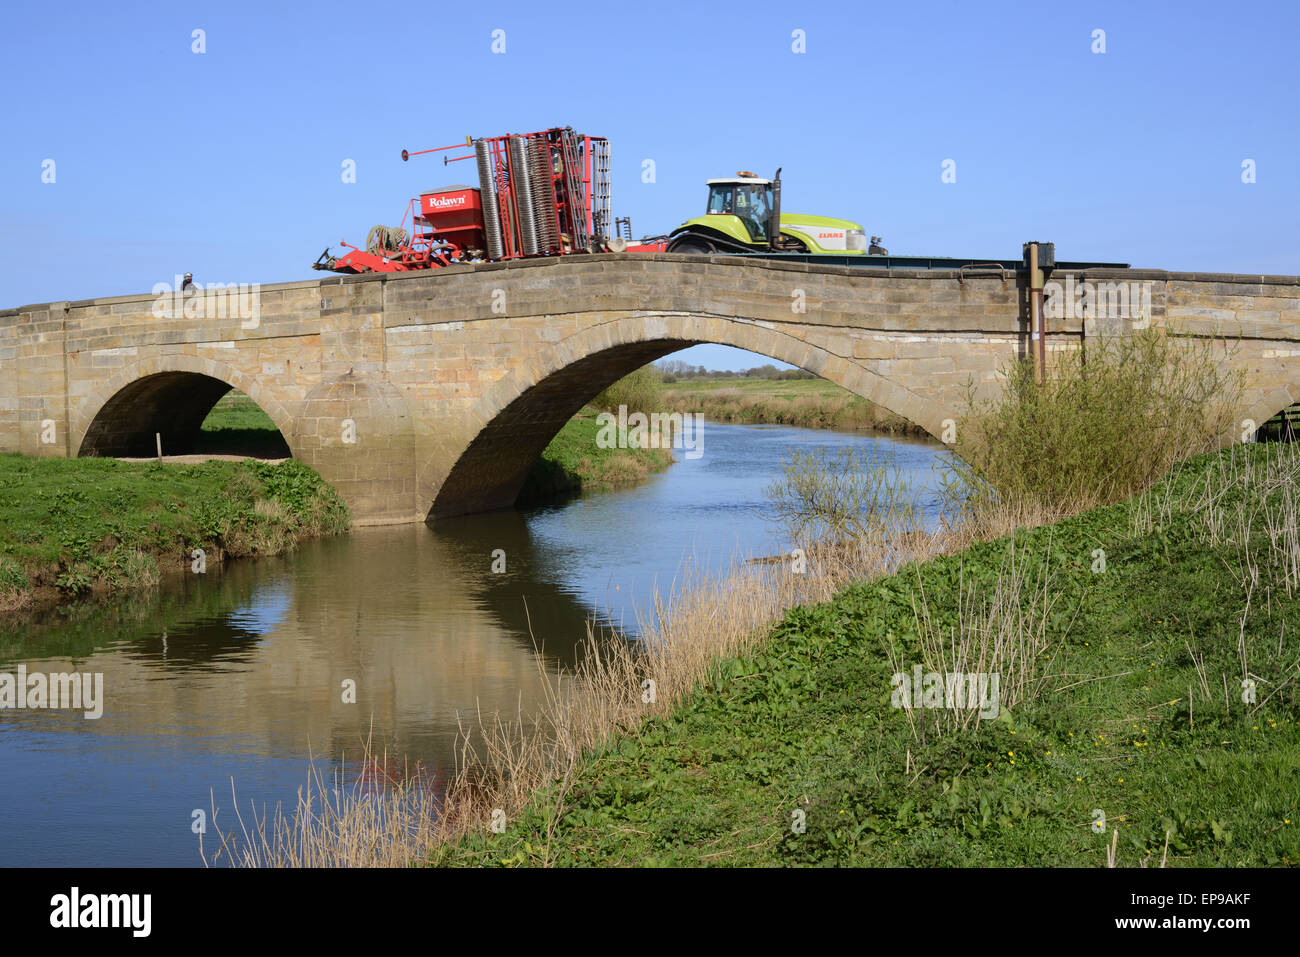 tractor crossing the river Derwent over grade II listed bridge Bubwith Yorkshire United Kingdom Stock Photo